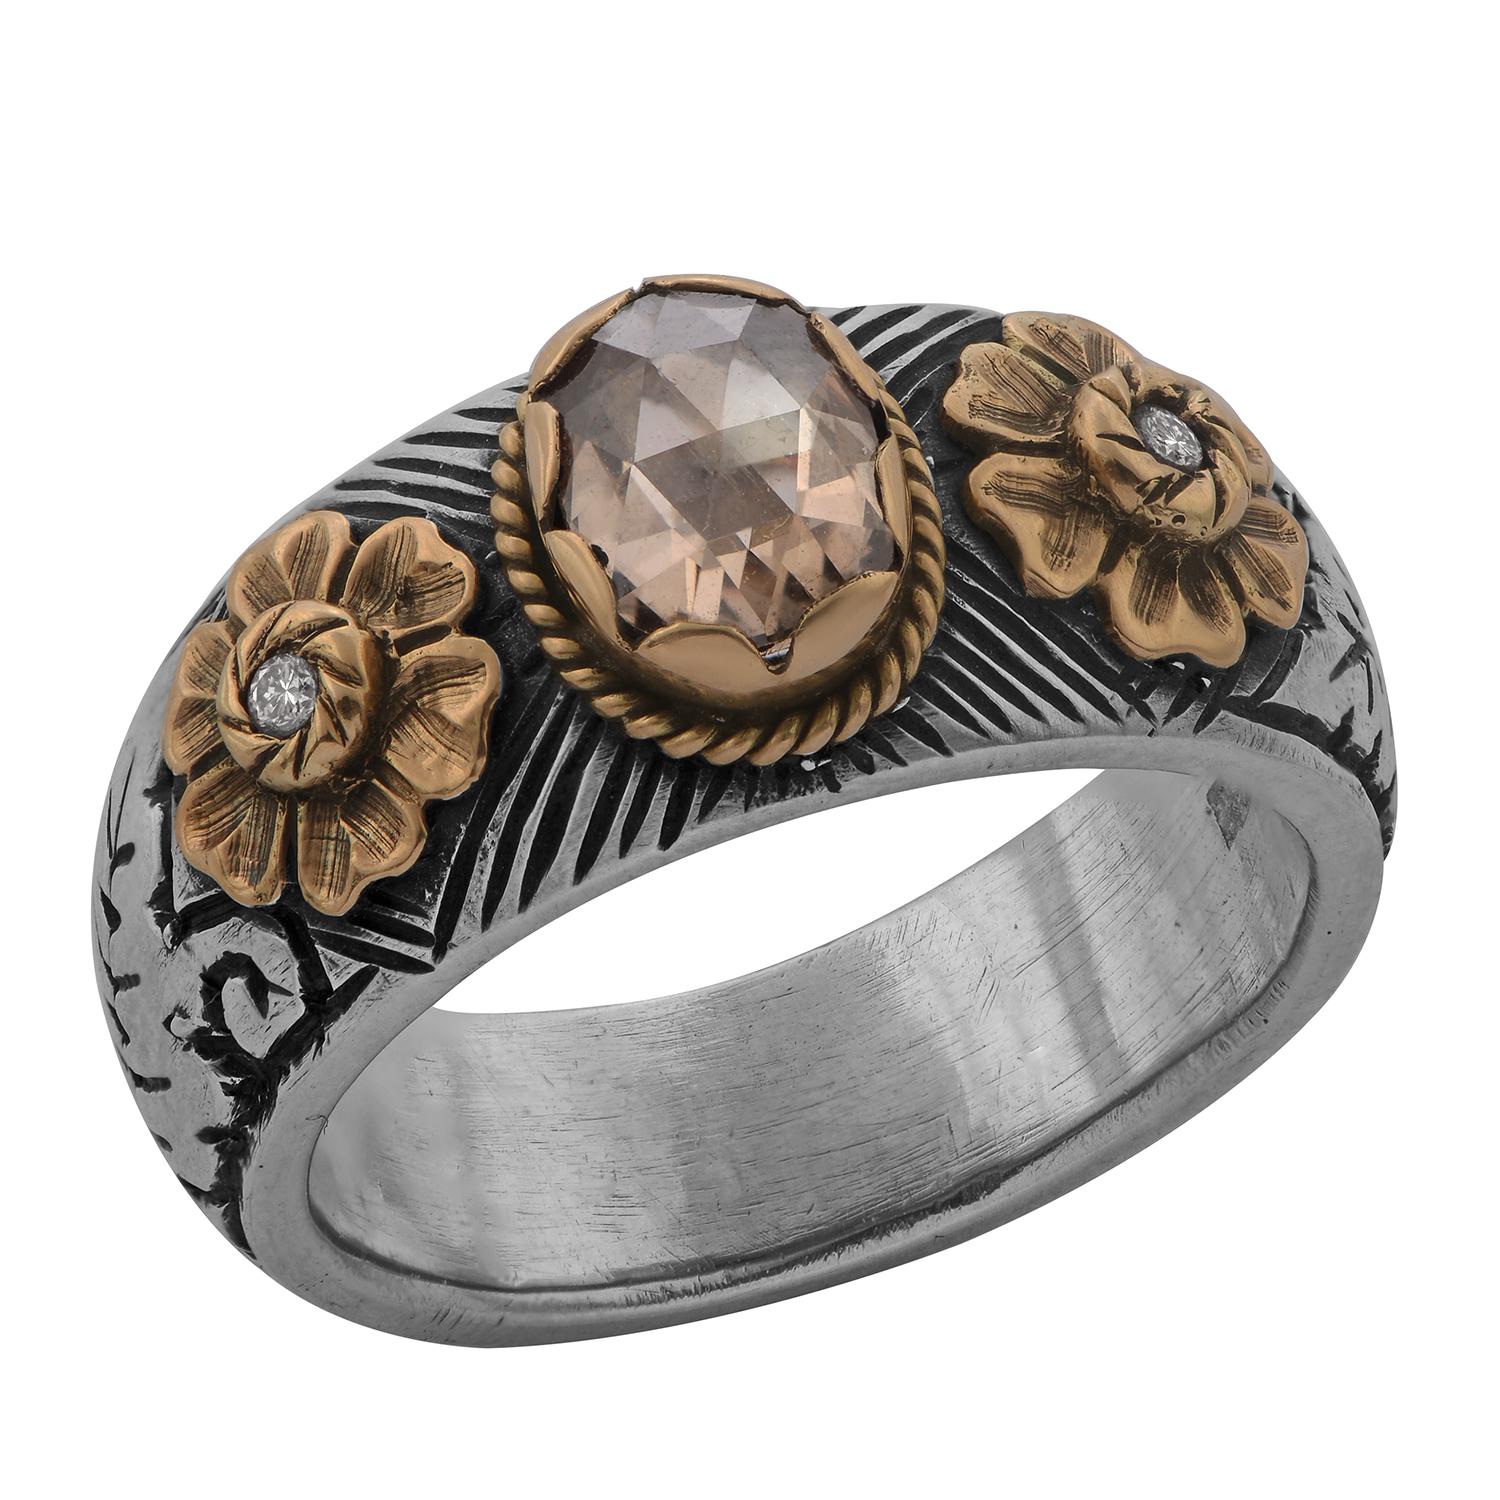 This is an exquisite one-of-a-kind diamond ring. Handmade in our workshops, it features beautiful Mughal Art engraving work. This is a highly specialized technique of hand engraving work. In this ring there are leaf and floral motifs, both in 18k